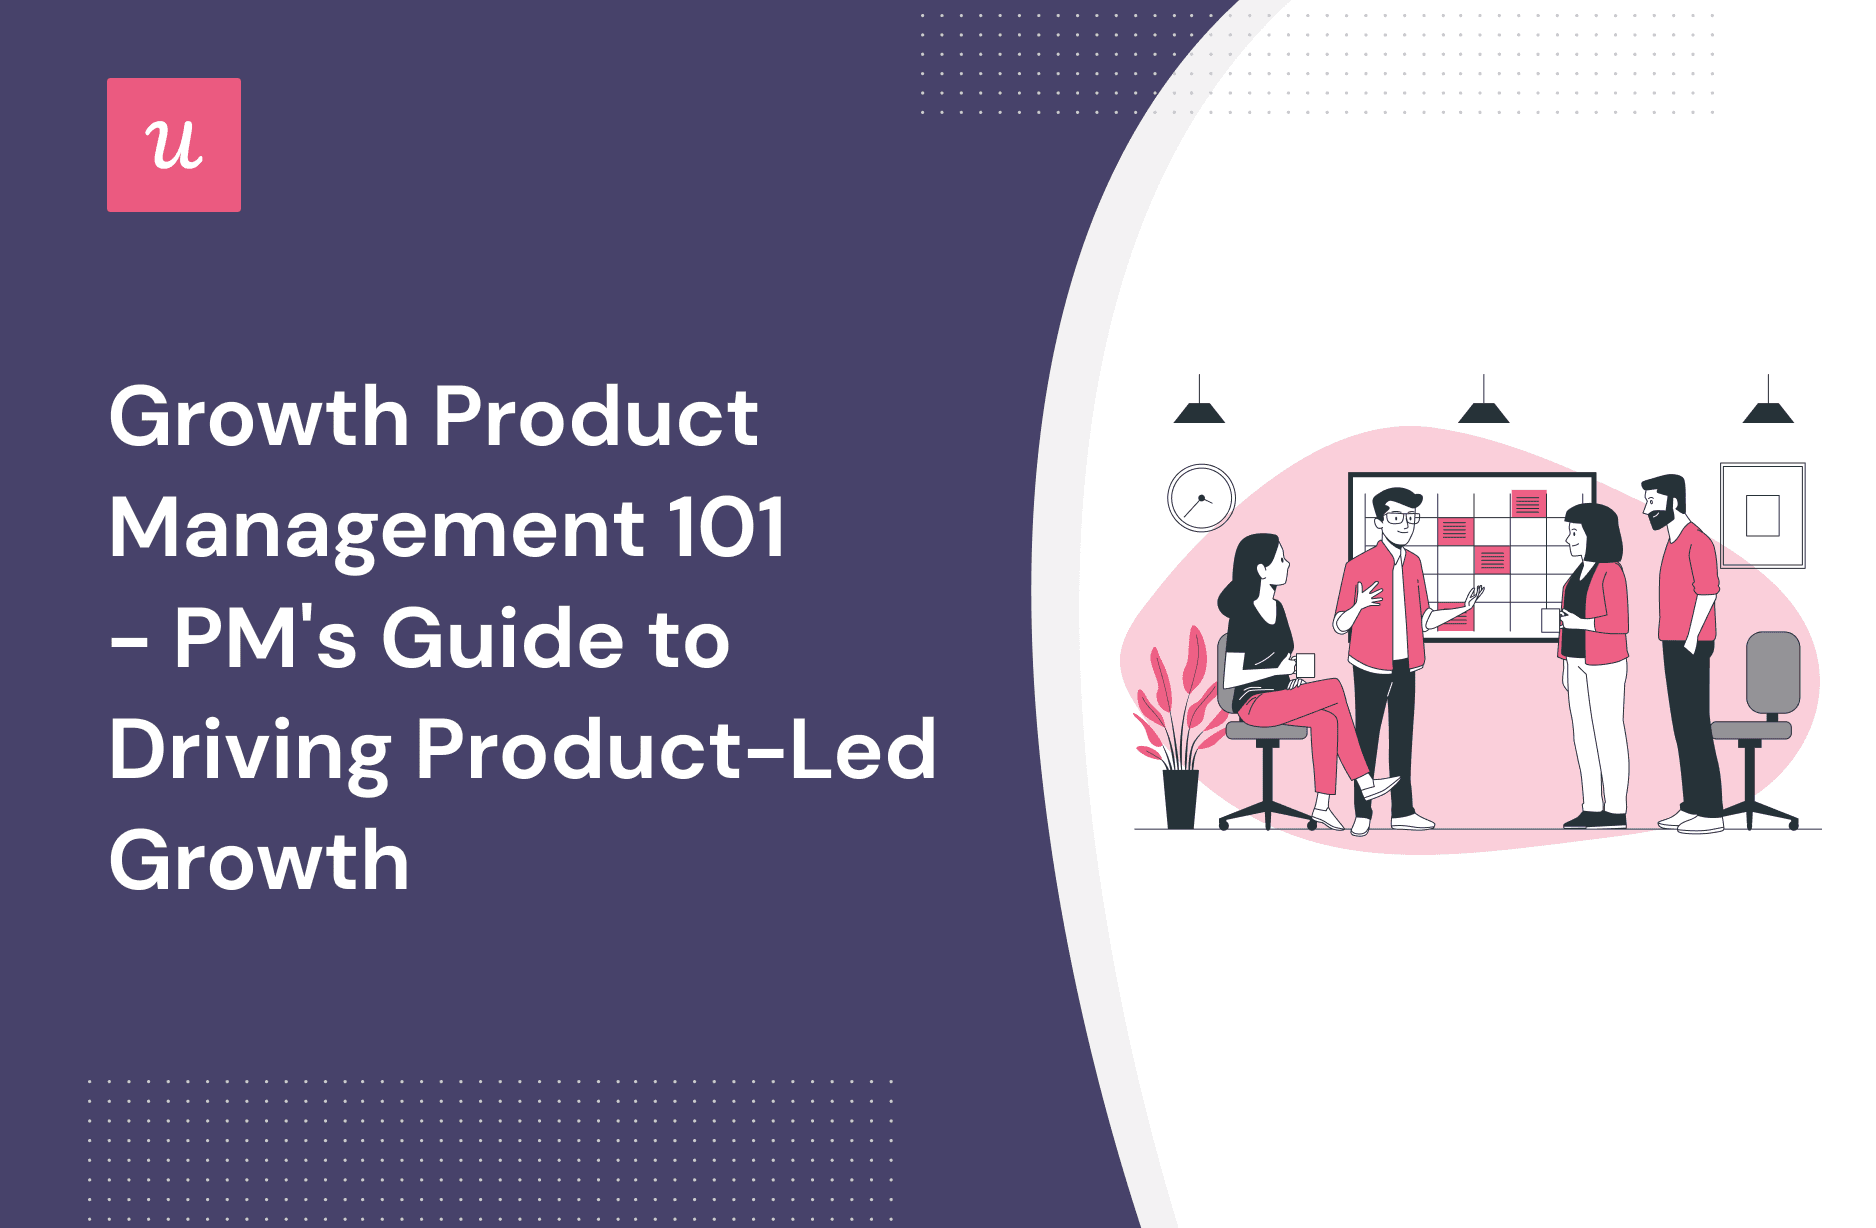 Growth Product Management 101- PM's Guide to Driving Product-Led Growth cover